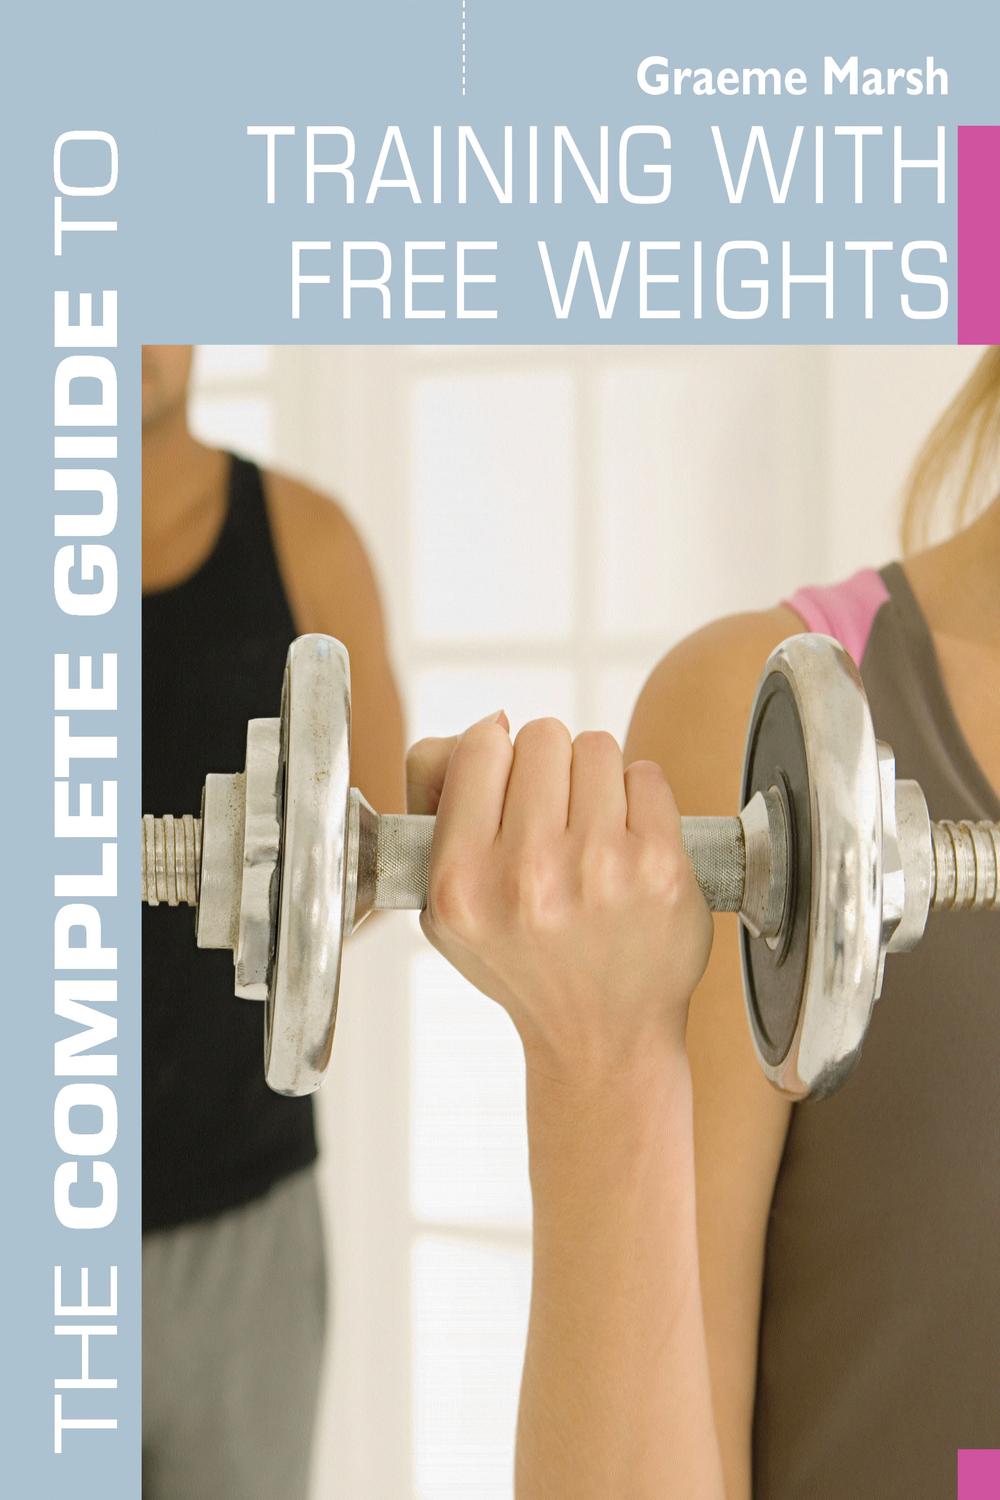 The Complete Guide to Training with Free Weights - Graeme Marsh